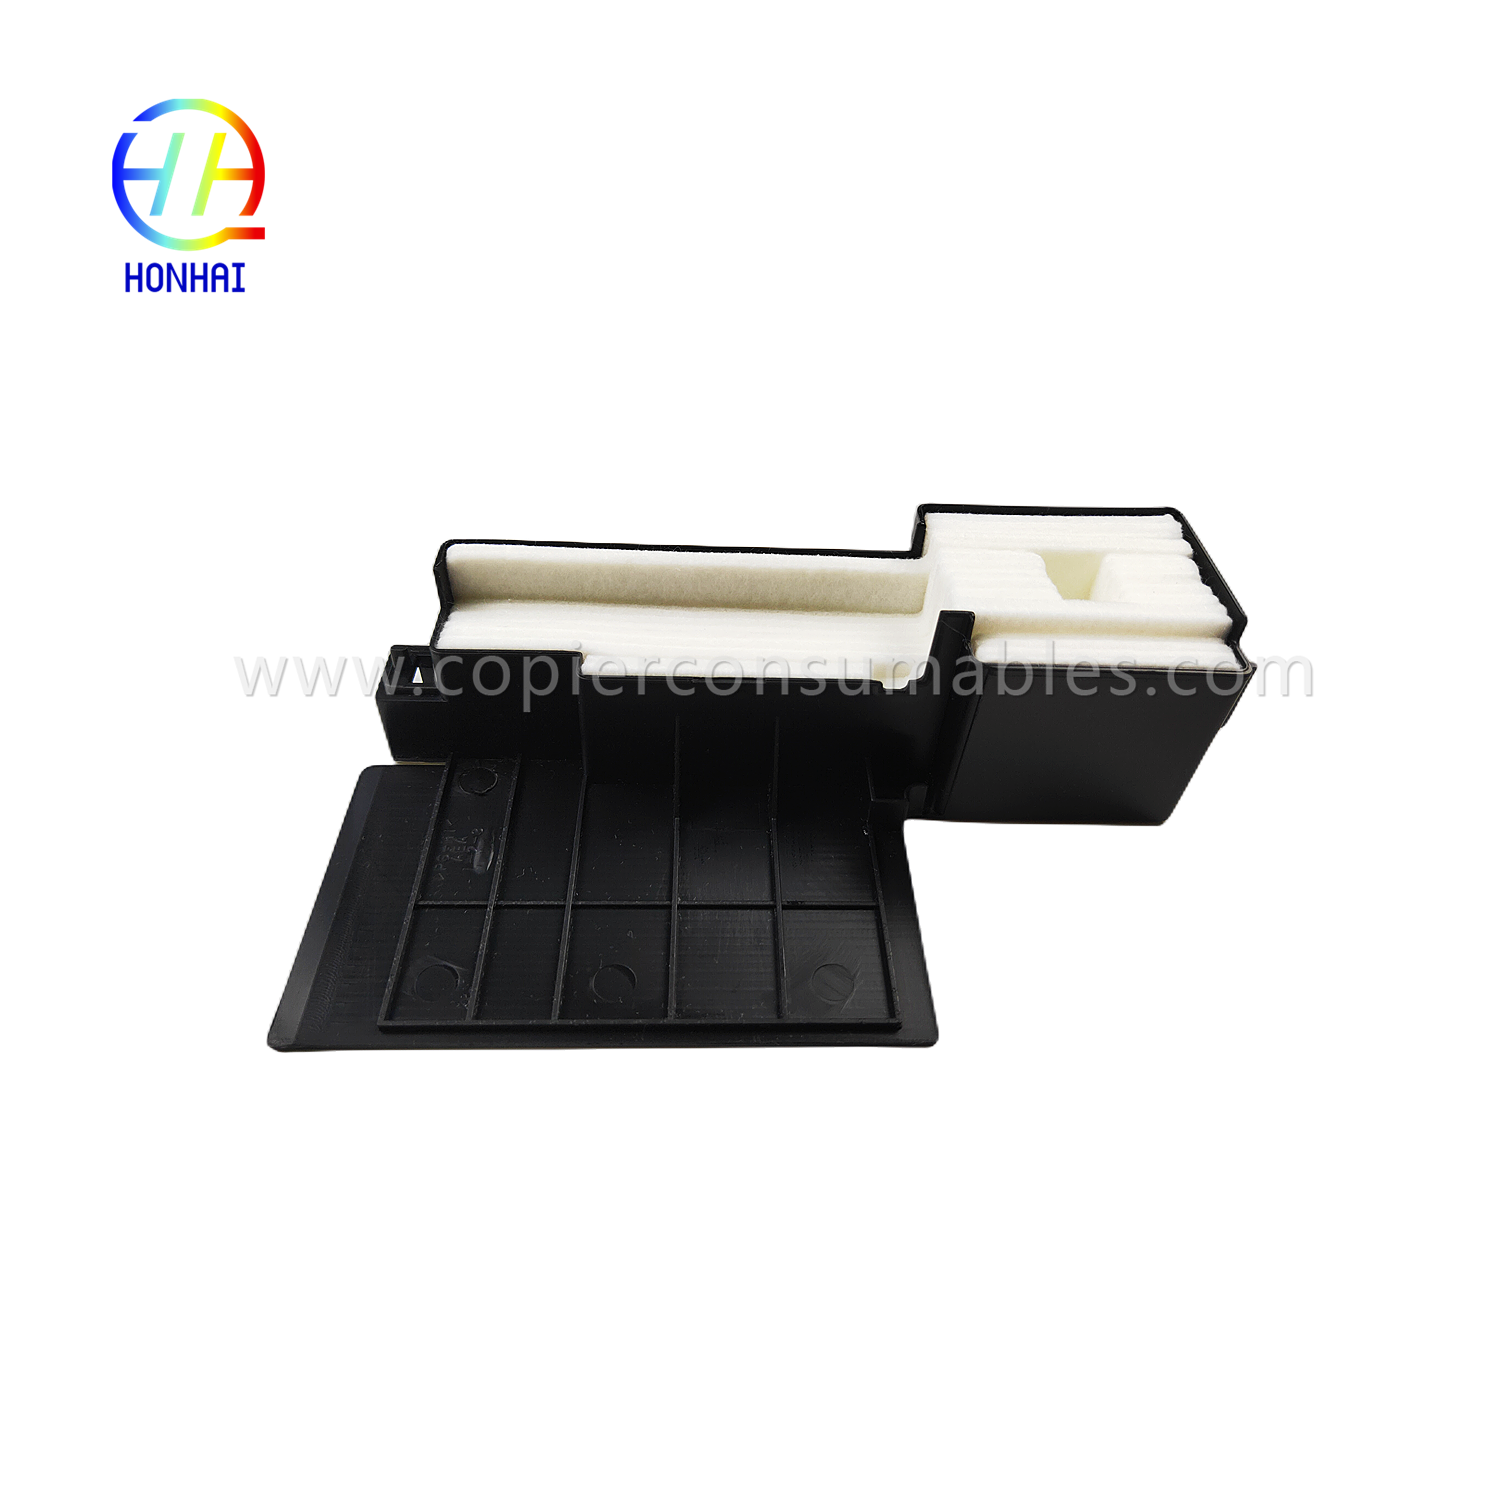 https://c585.goodao.net/waste-inkt-pad-pack-forl220-l360-l380-printer-product/